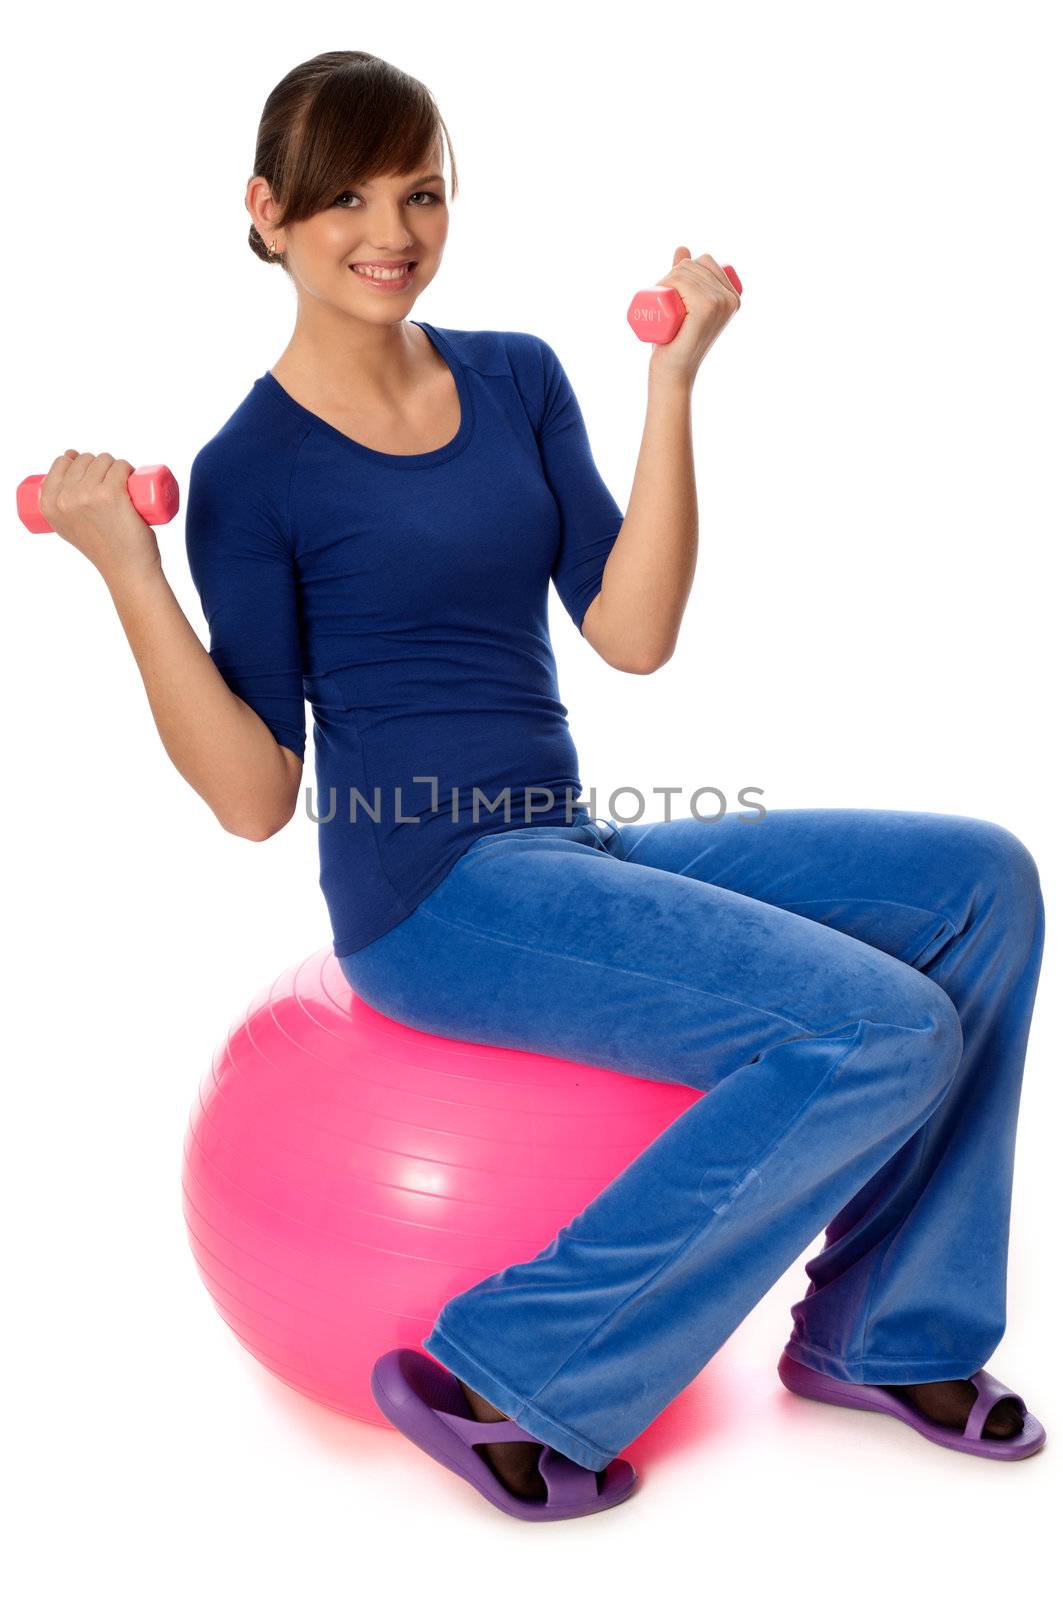 Instructor taking exercise class using ball and dumbbells at gym